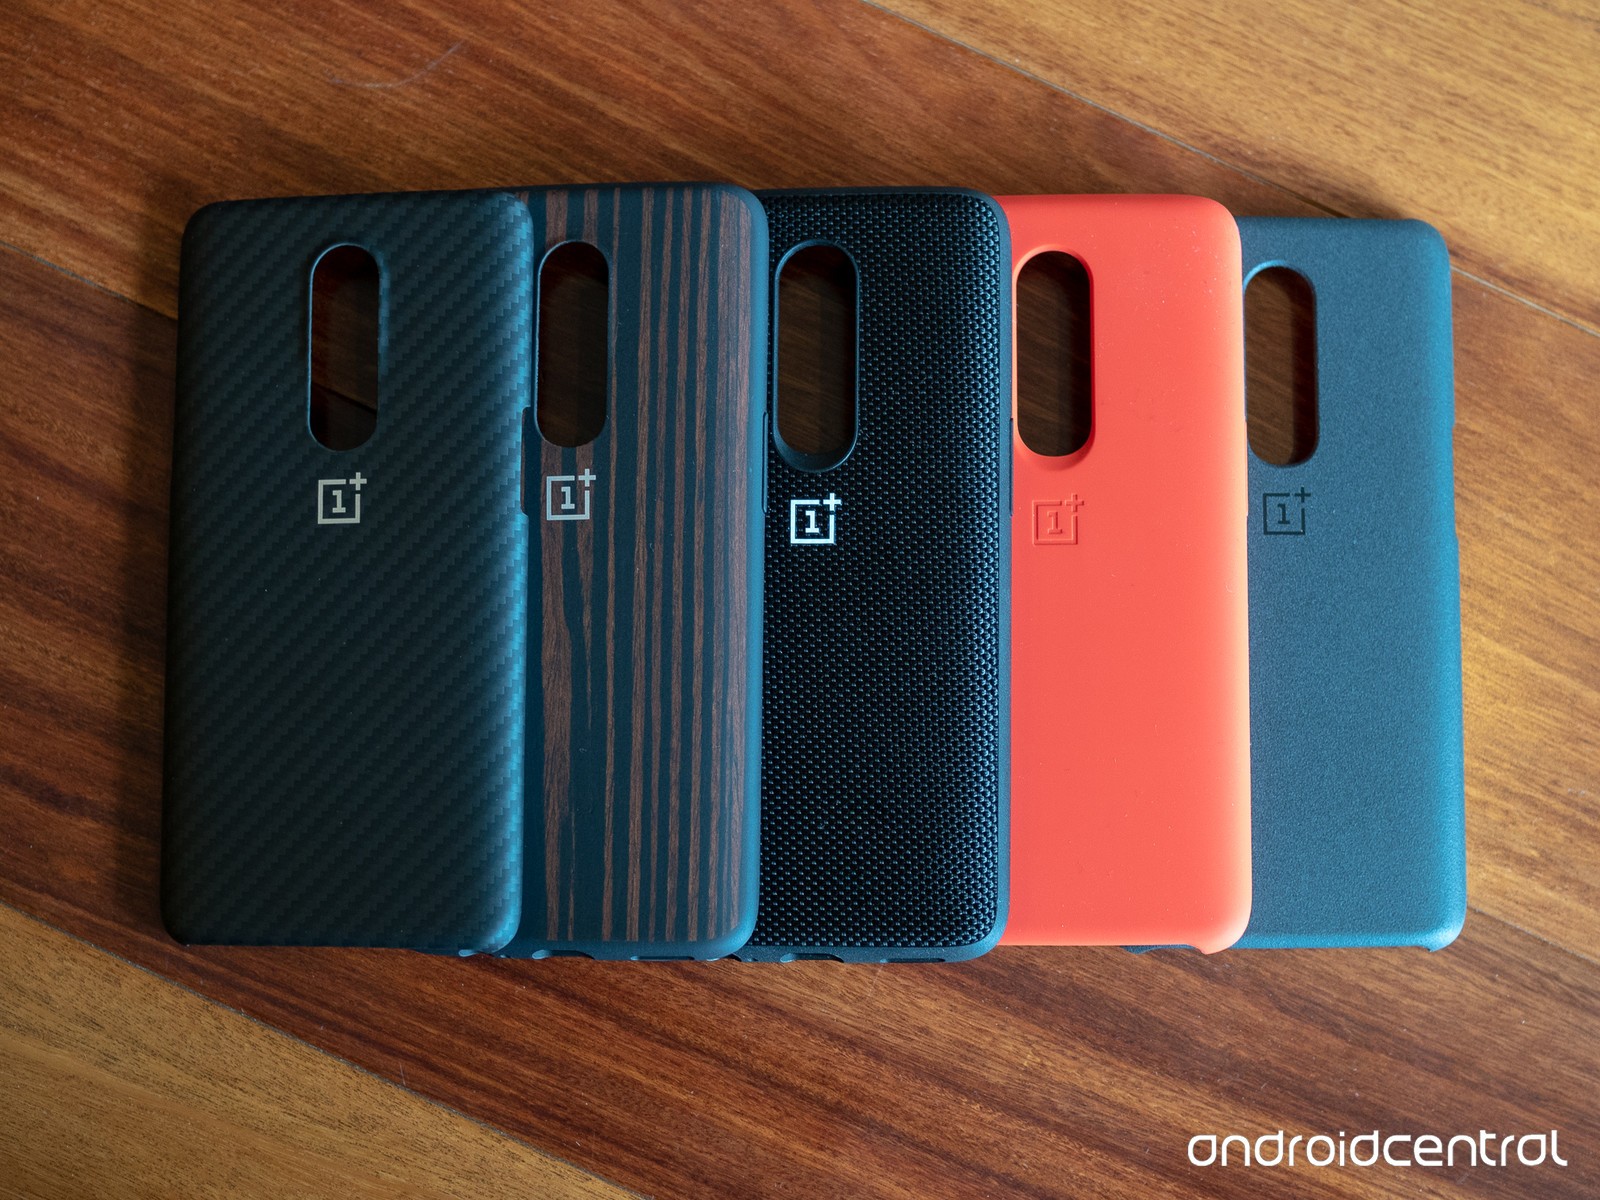 Prices for OnePlus 6T accessories are out now for Europe